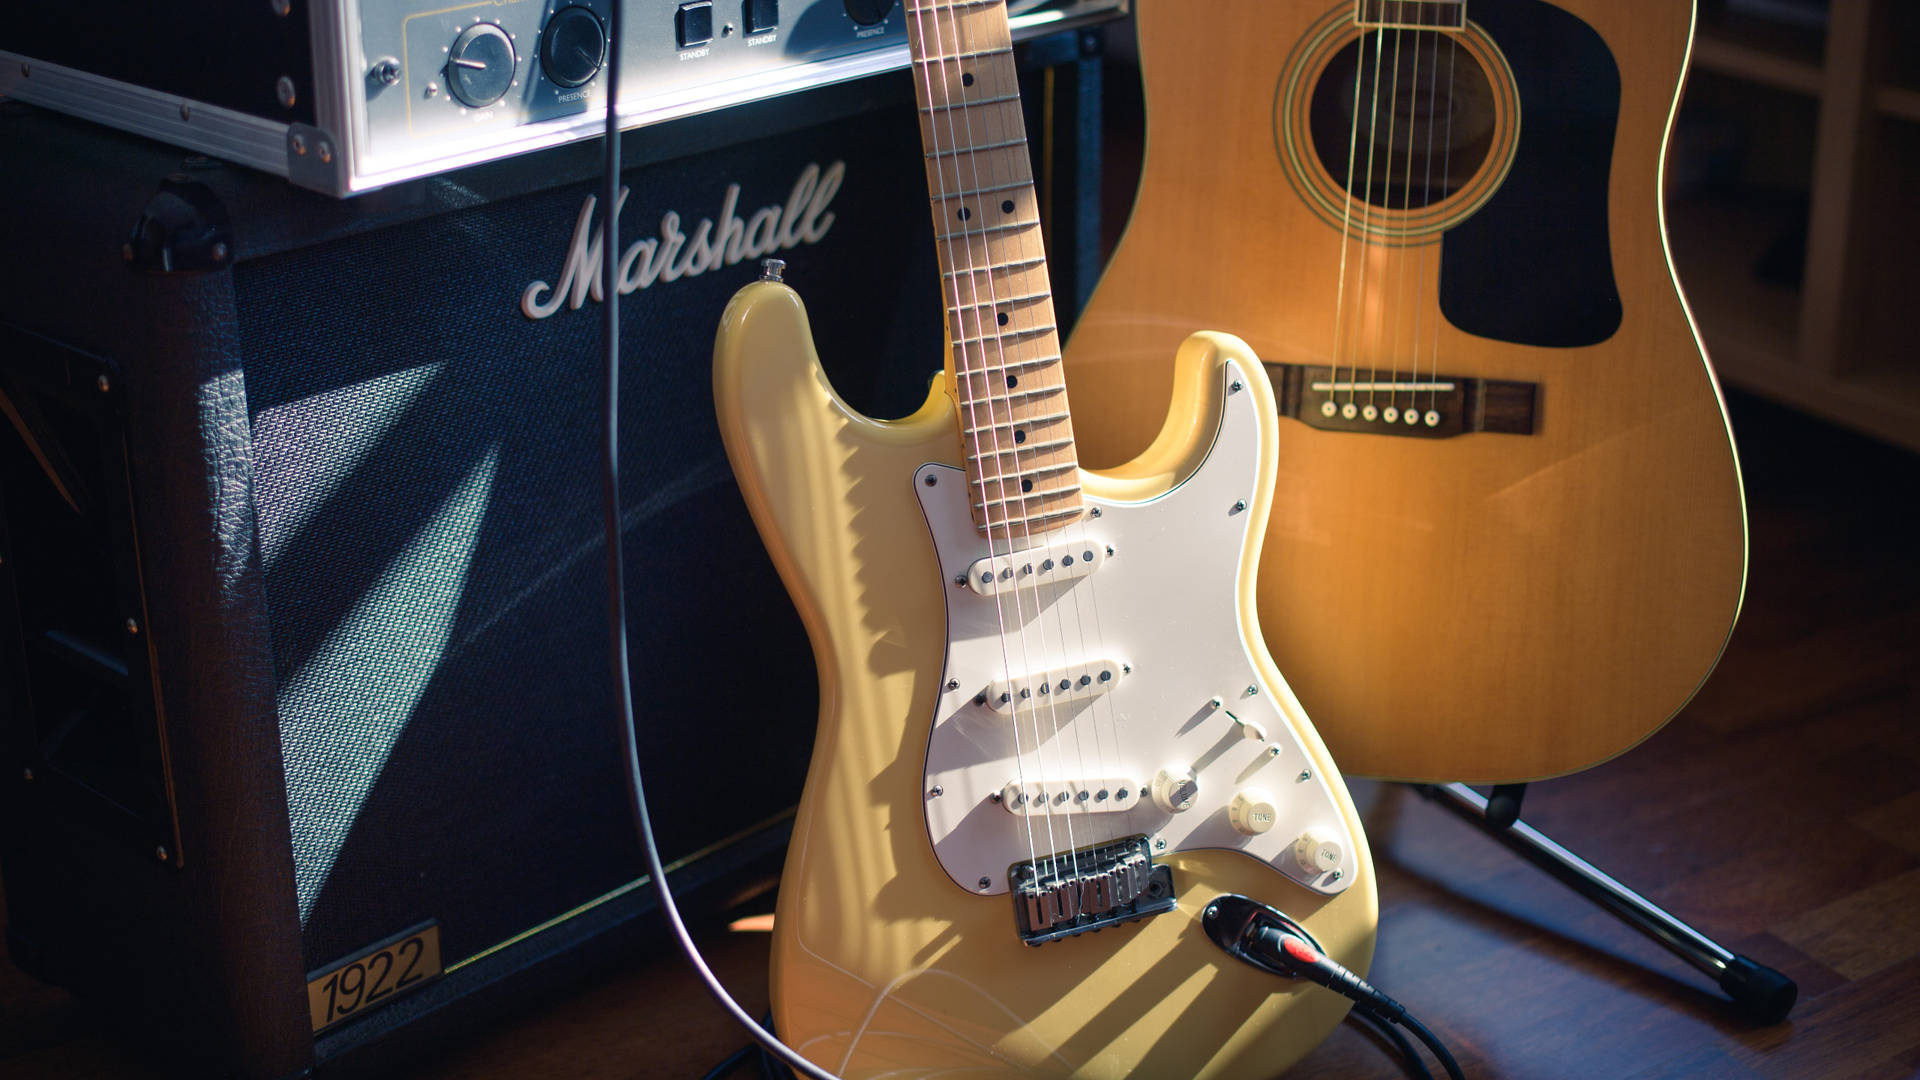 Guitars With Marshall Guitar Amplifier Wallpaper